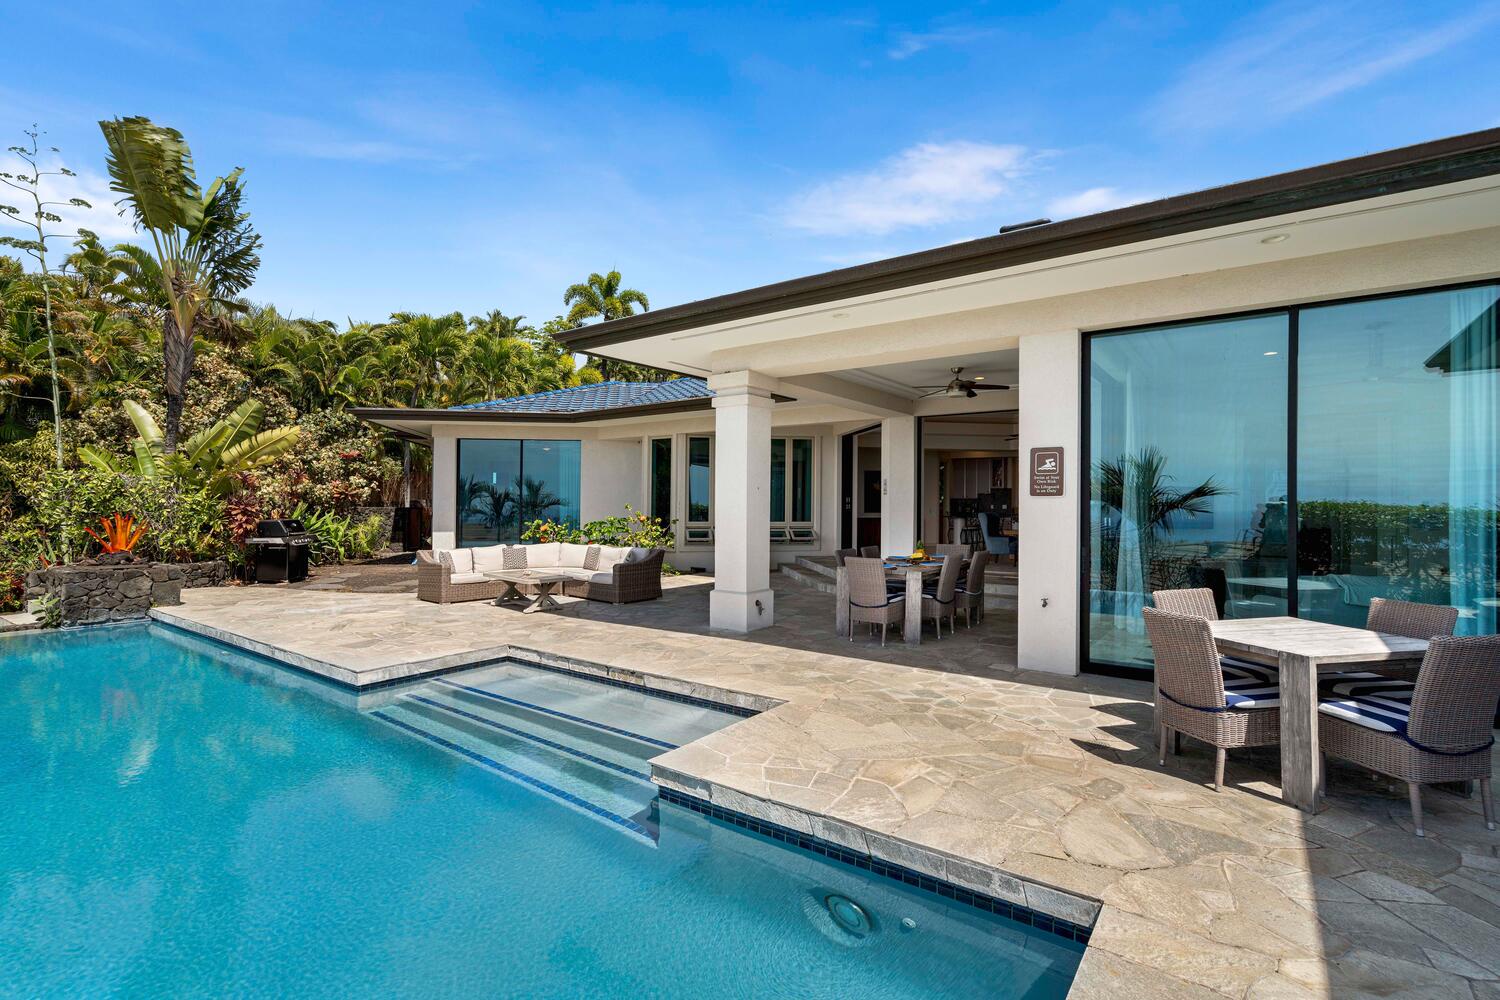 Kailua Kona Vacation Rentals, Blue Hawaii - Pocket doors throughout the house bring the outside in and allow breezes to flow freely!